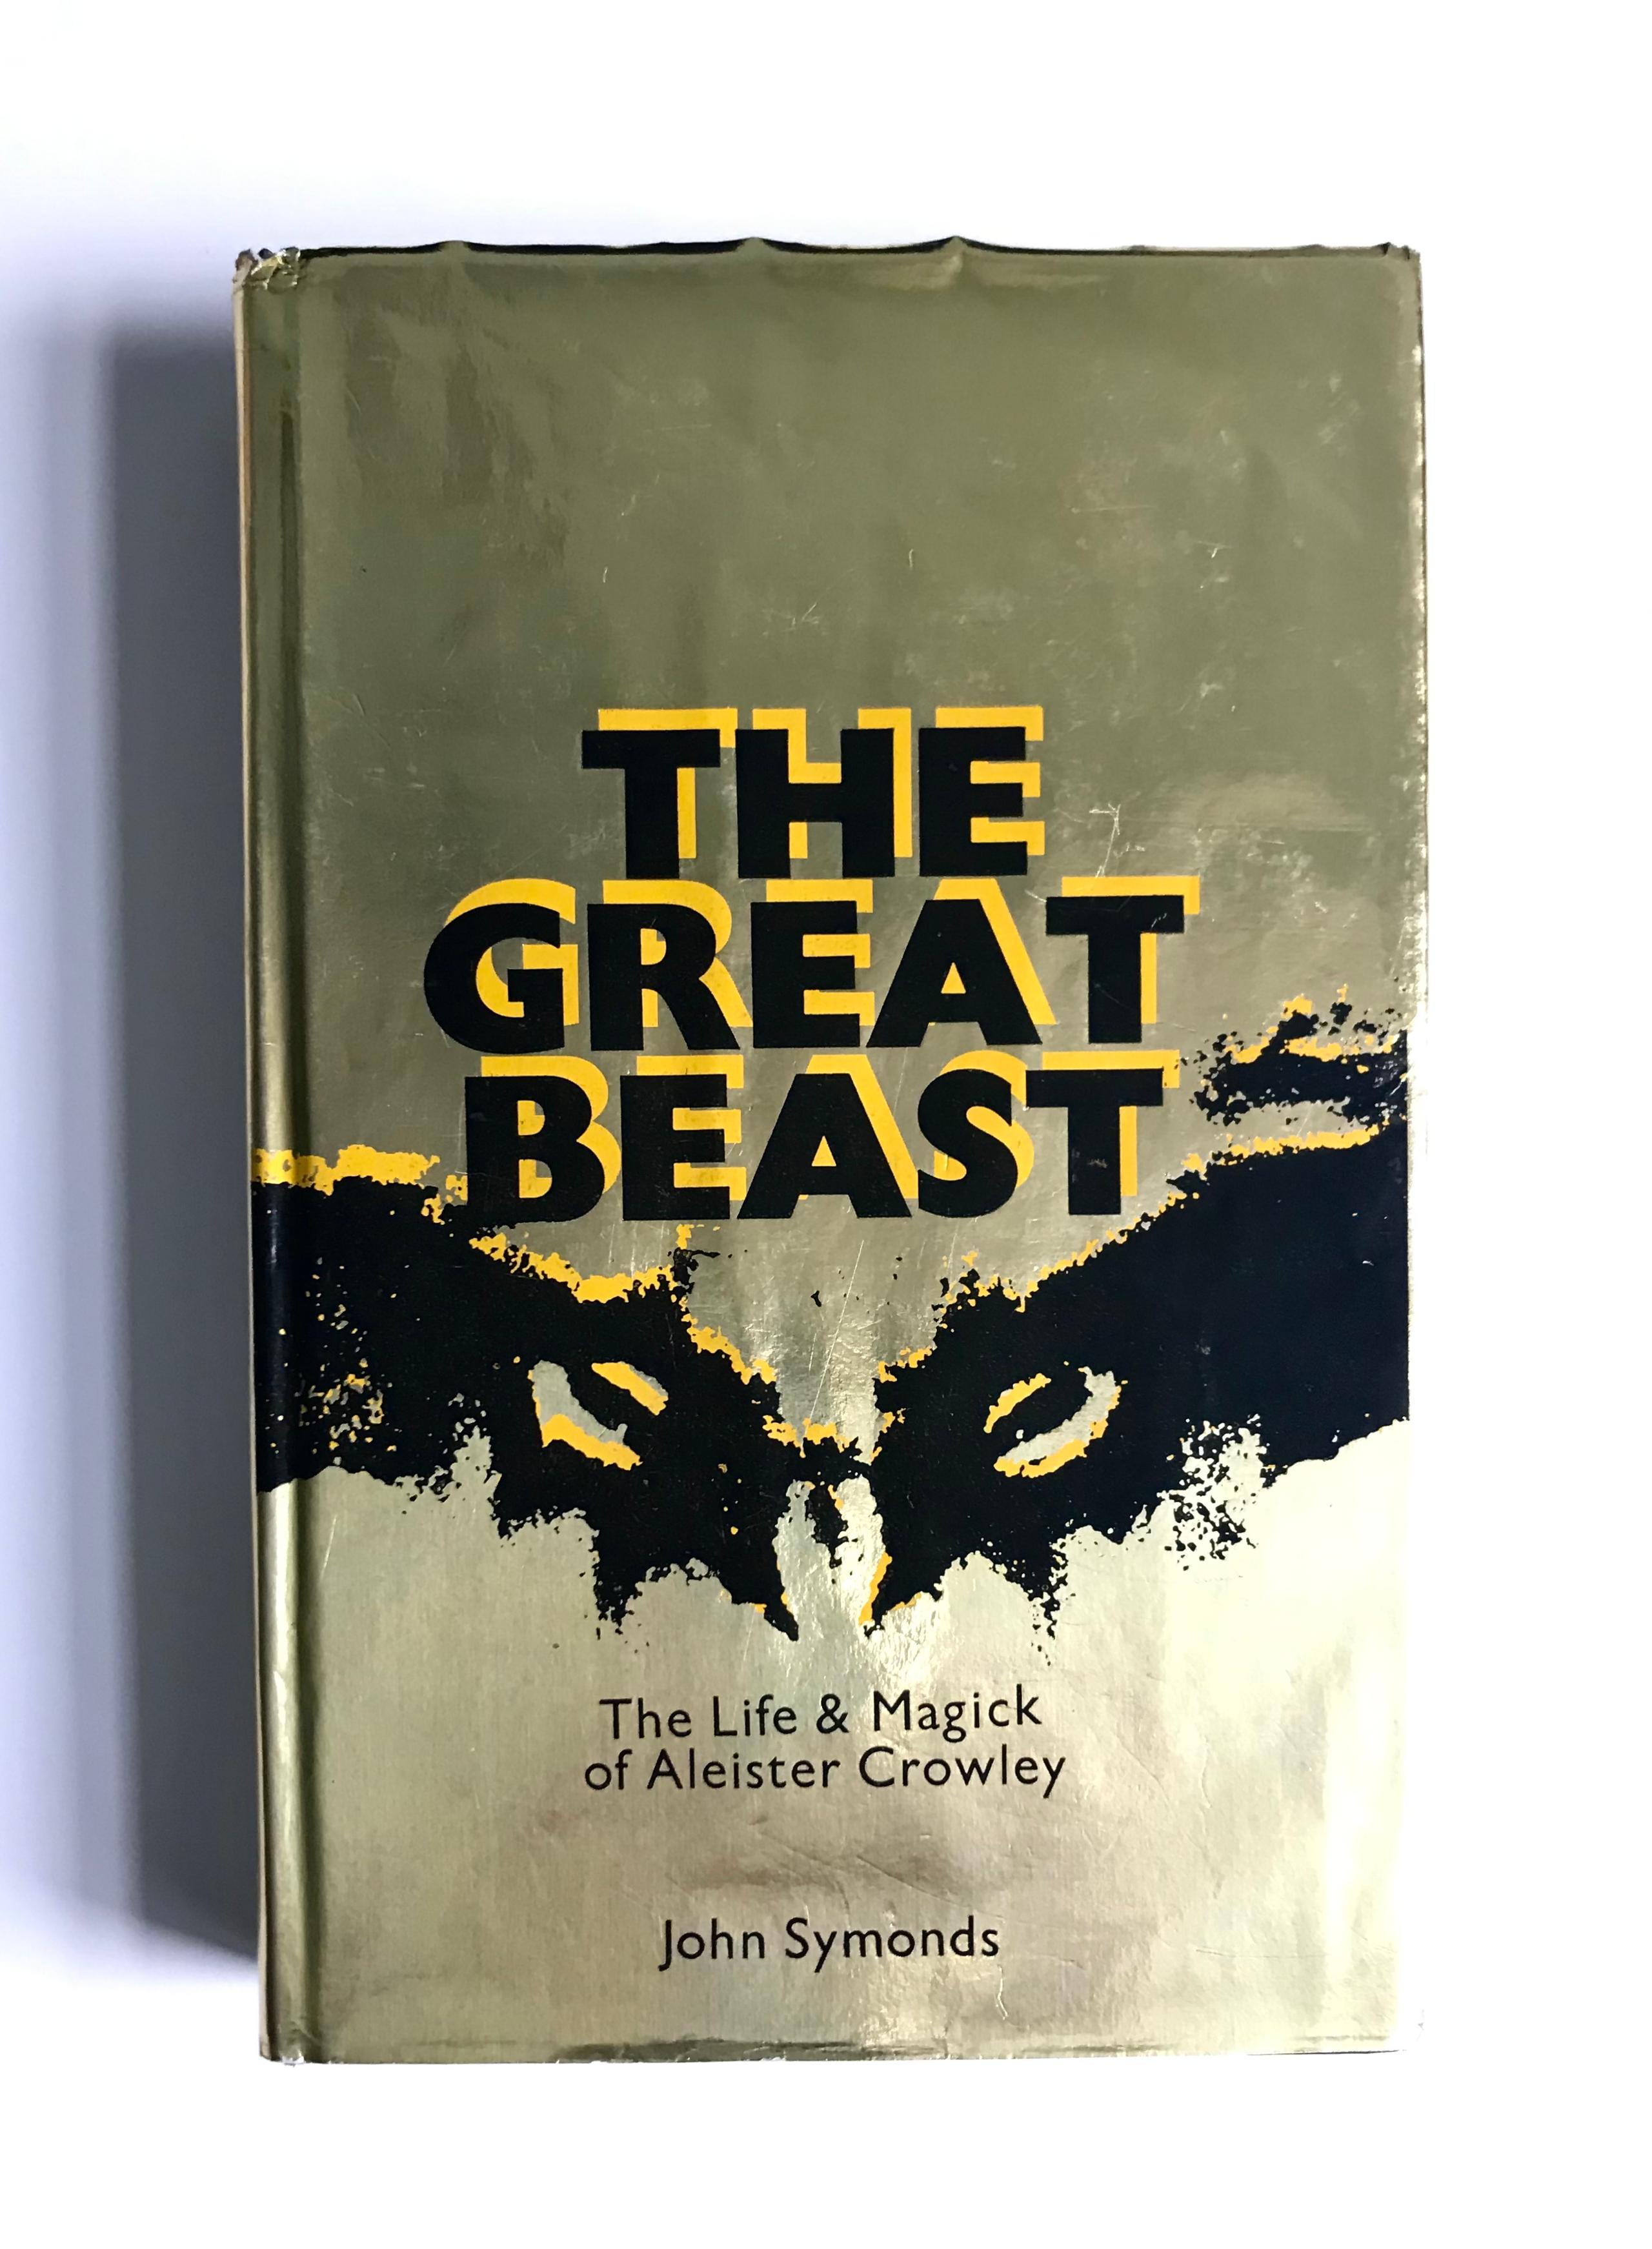 Aleister Crowley The Great Beast The Life & Magick by John Symonds